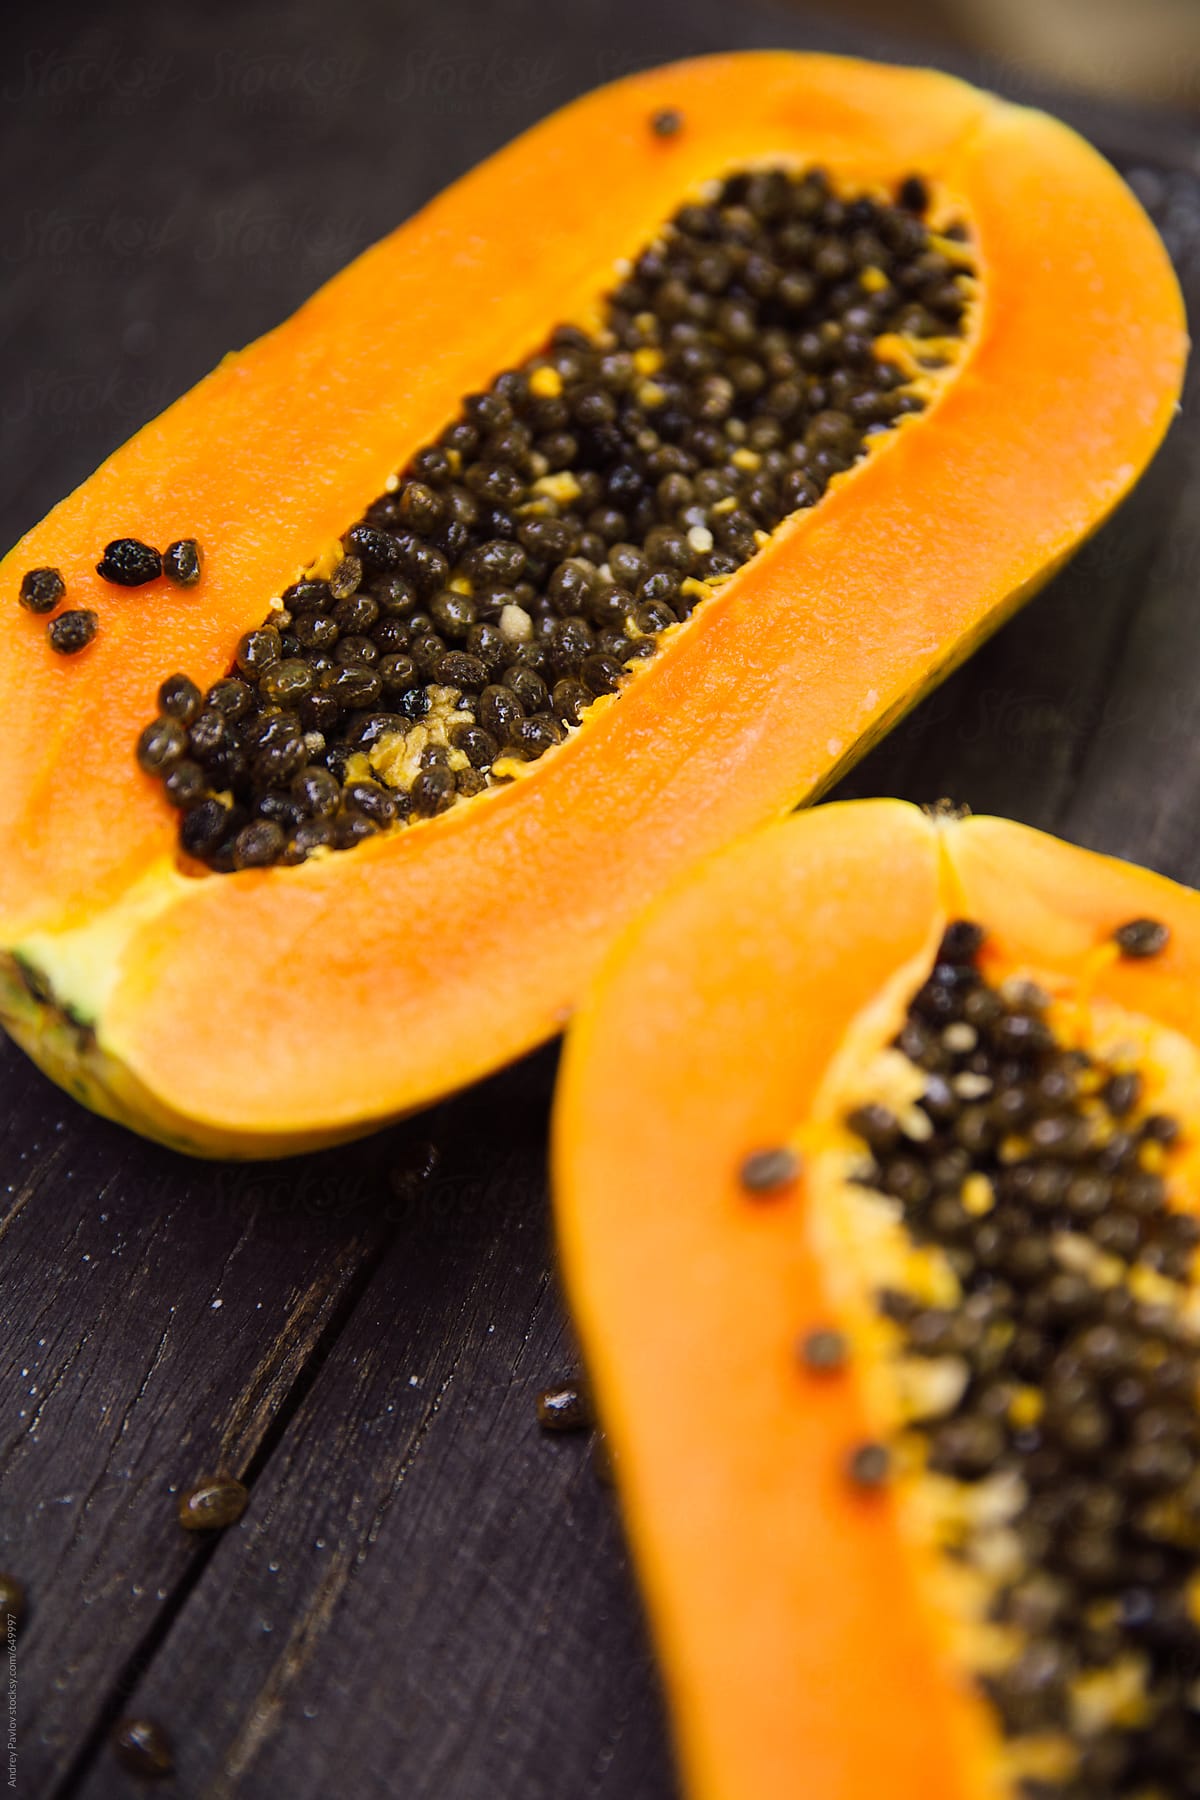 Two parts of a papaya fruit with seeds